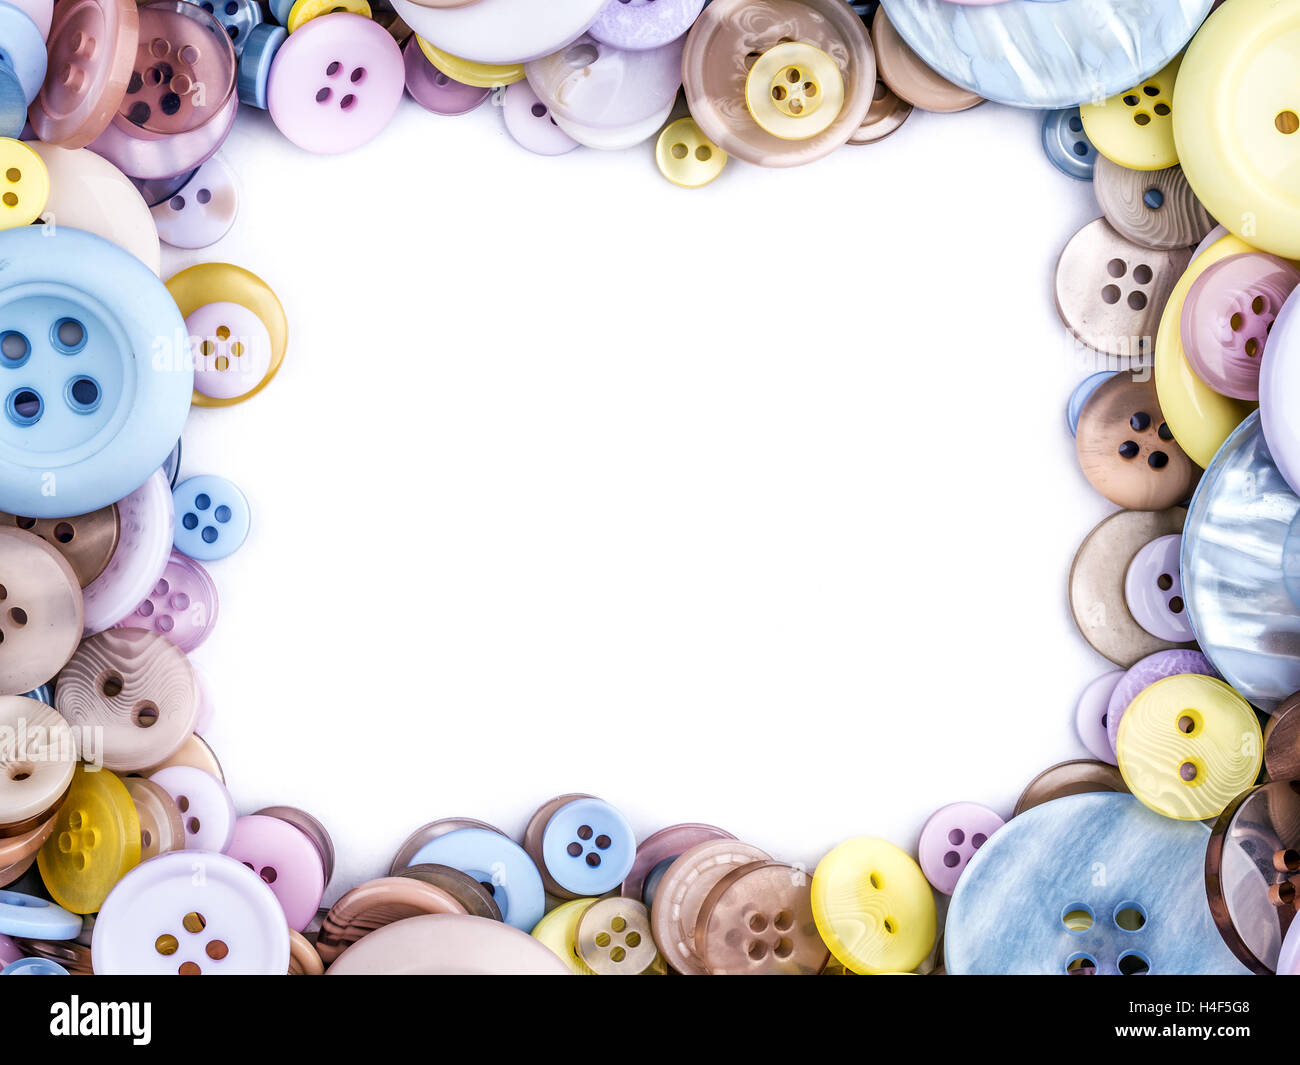 Framework arranged from apparel buttons in different size and colors with white copy space Stock Photo